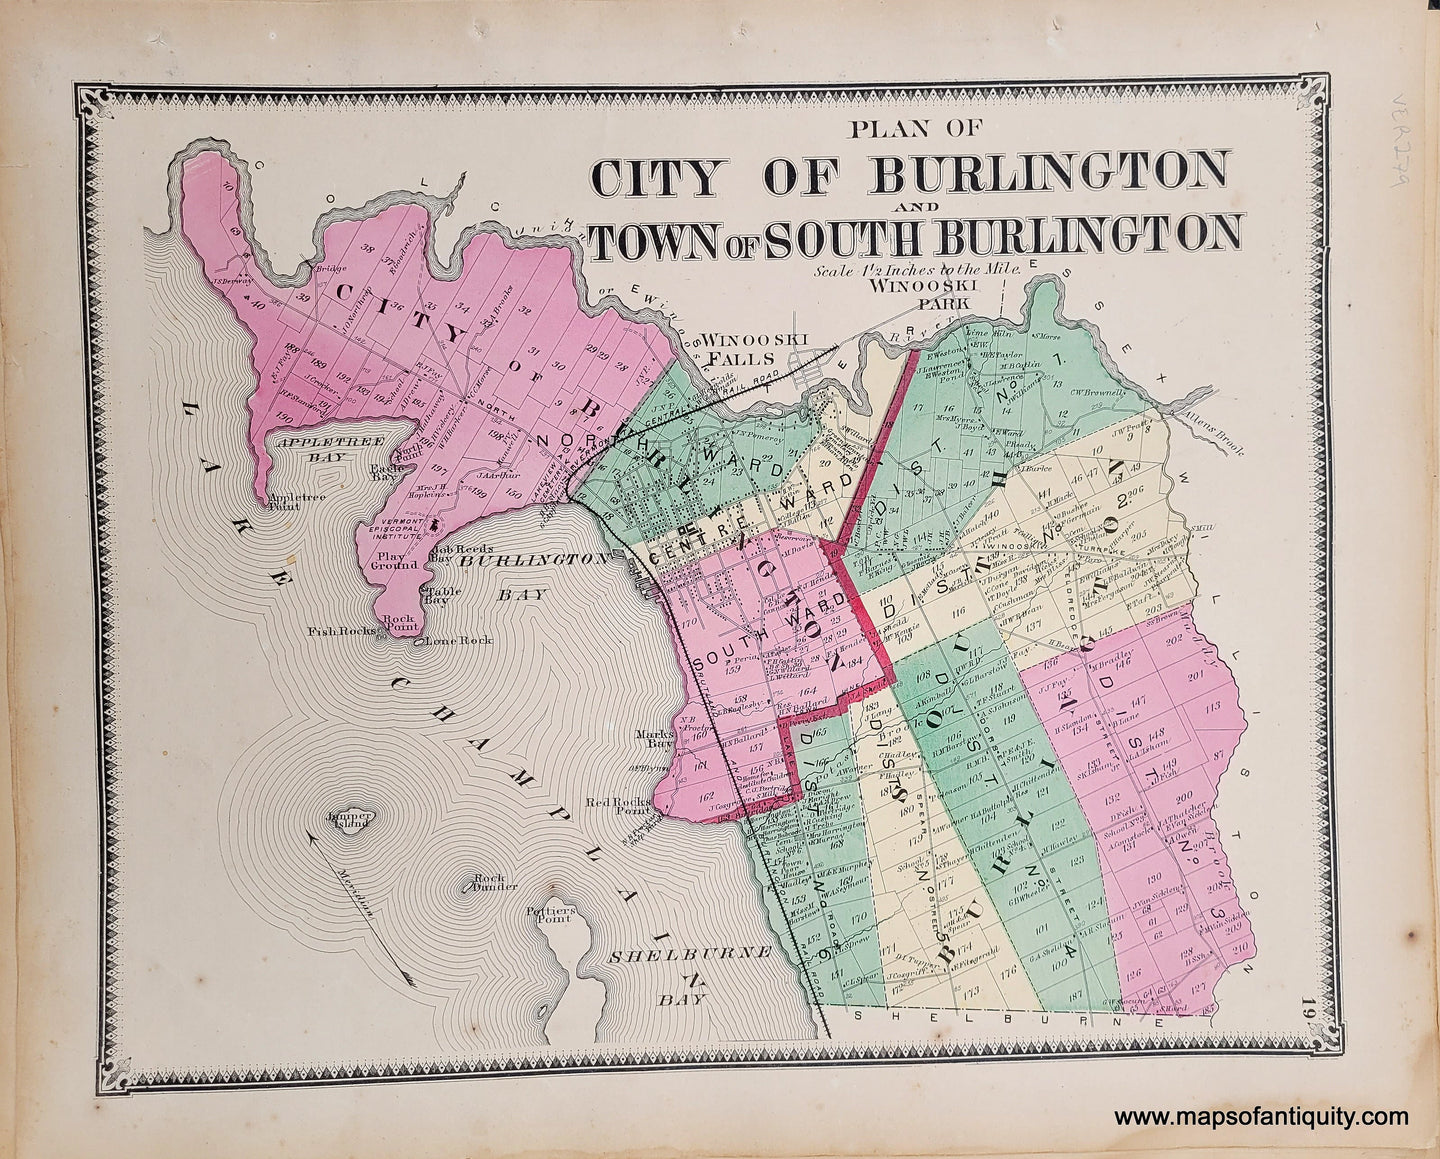 Genuine-Antique-Hand-colored-Map-Plan-of-the-City-of-Burlington-and-Town-of-South-Burlington-1869-Beers-Ellis-Soule-Maps-Of-Antiquity